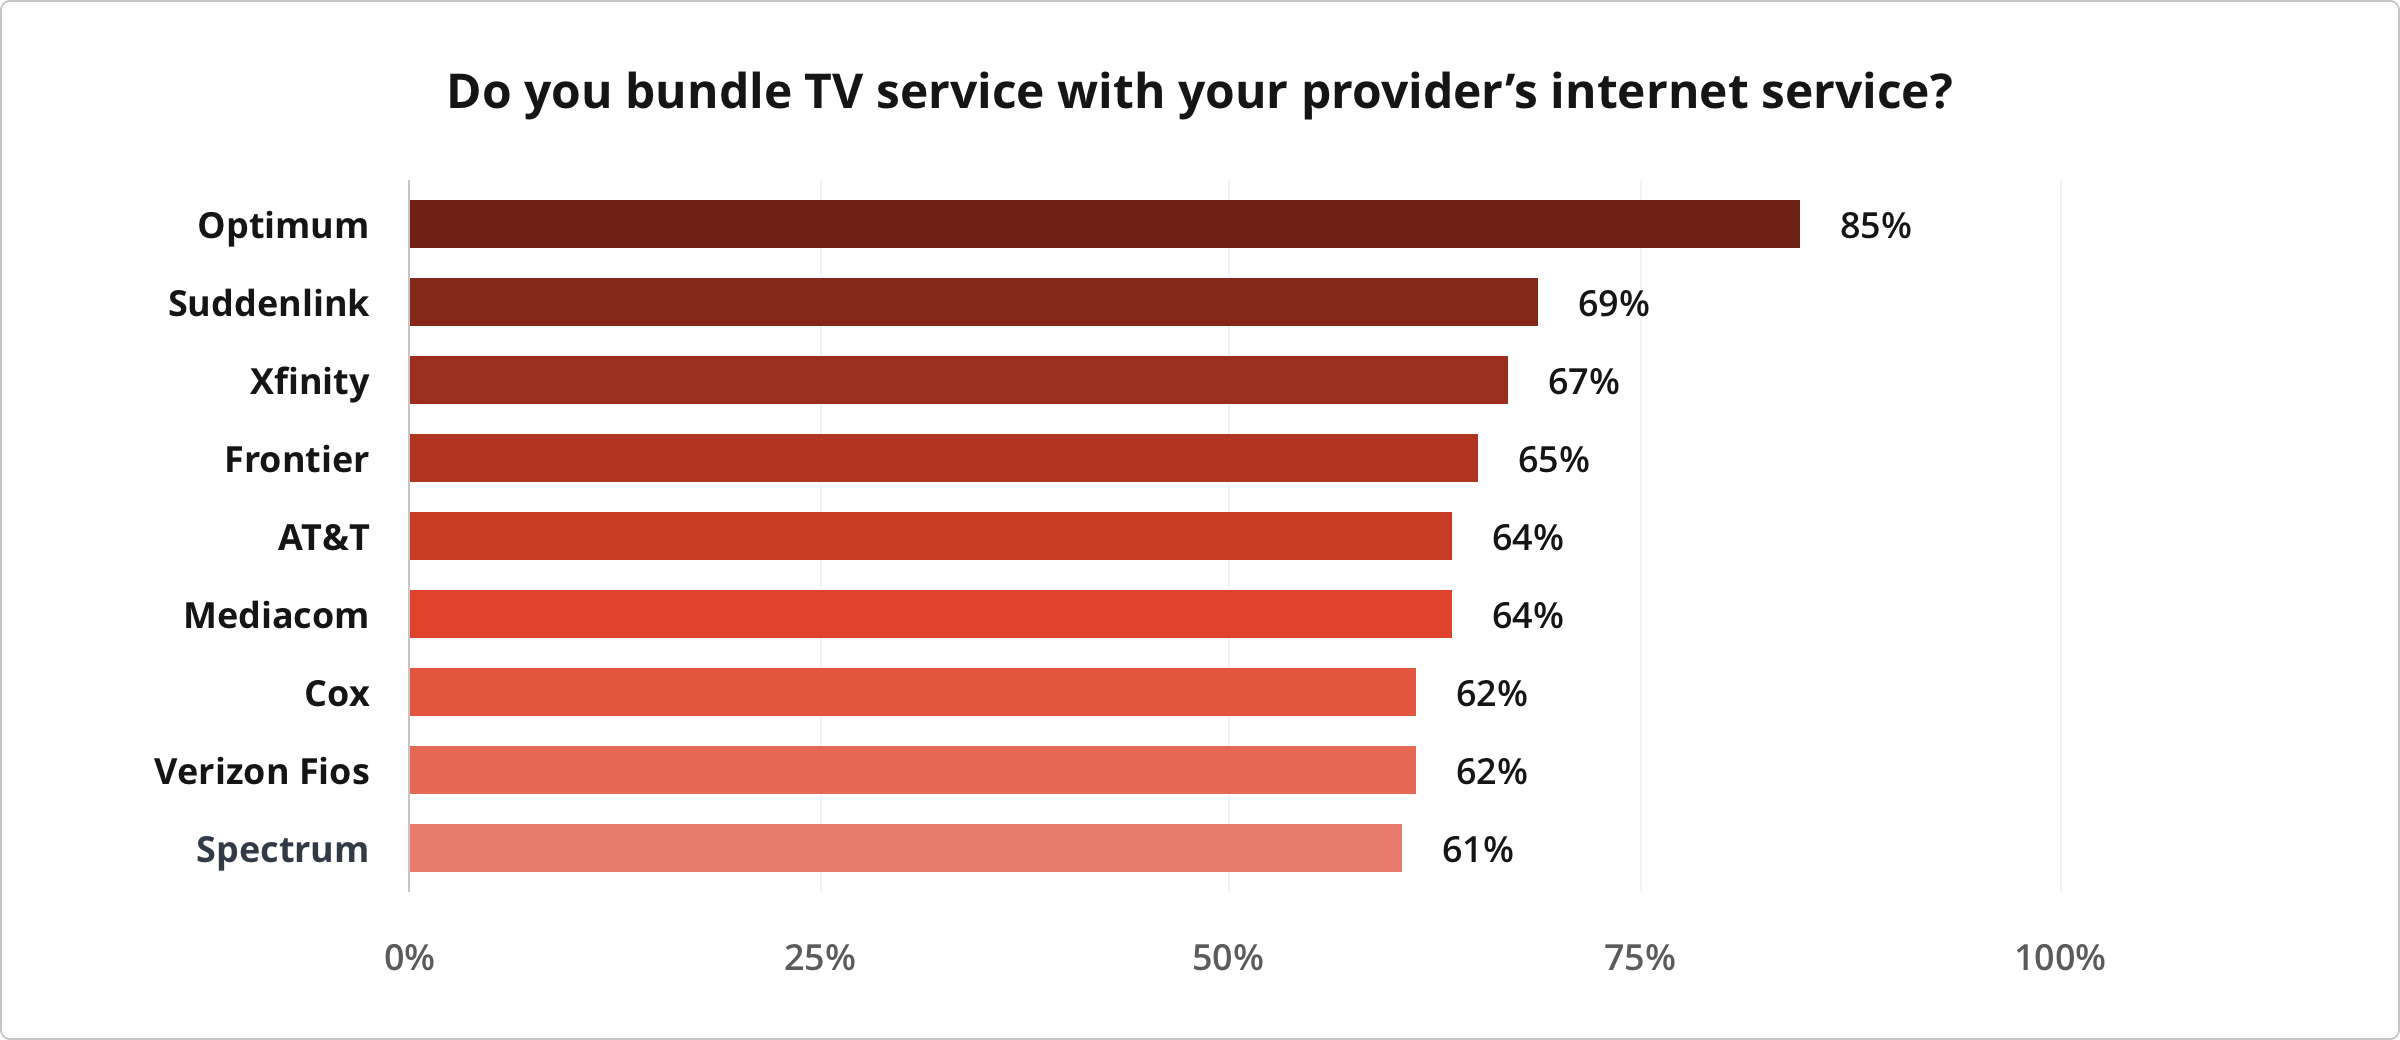 Graph showing what percent of users bundle provider's internet service with TV by brand